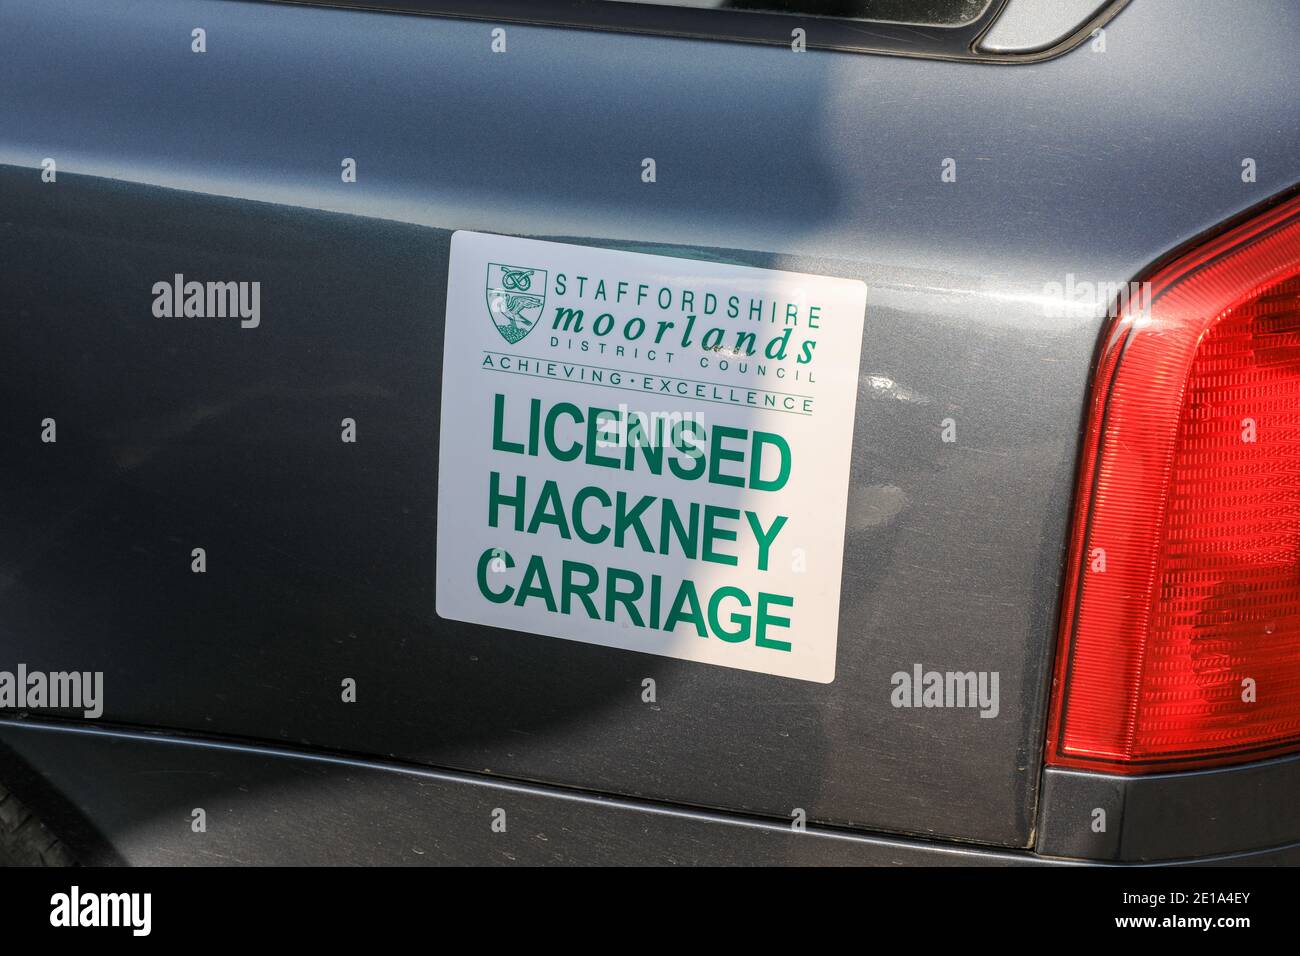 A sign on a taxi or taxi cab saying 'licensed hackney carriage', Staffordshire, England, UK Stock Photo